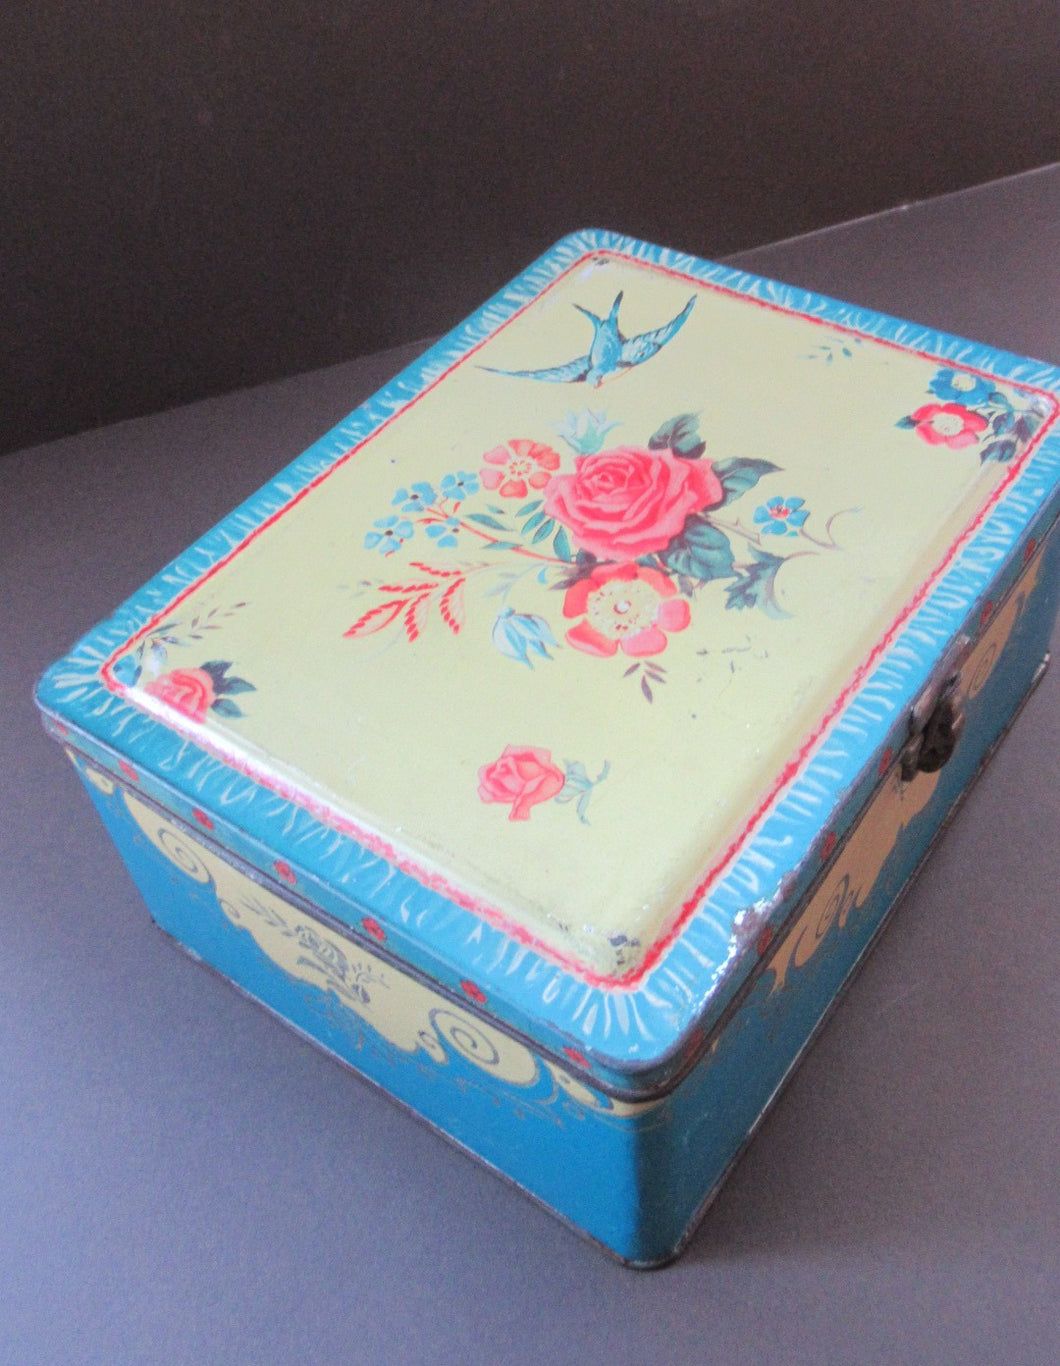 Vintage 1950s Large Blue Bird Toffee Tin Contents 5 lbs 